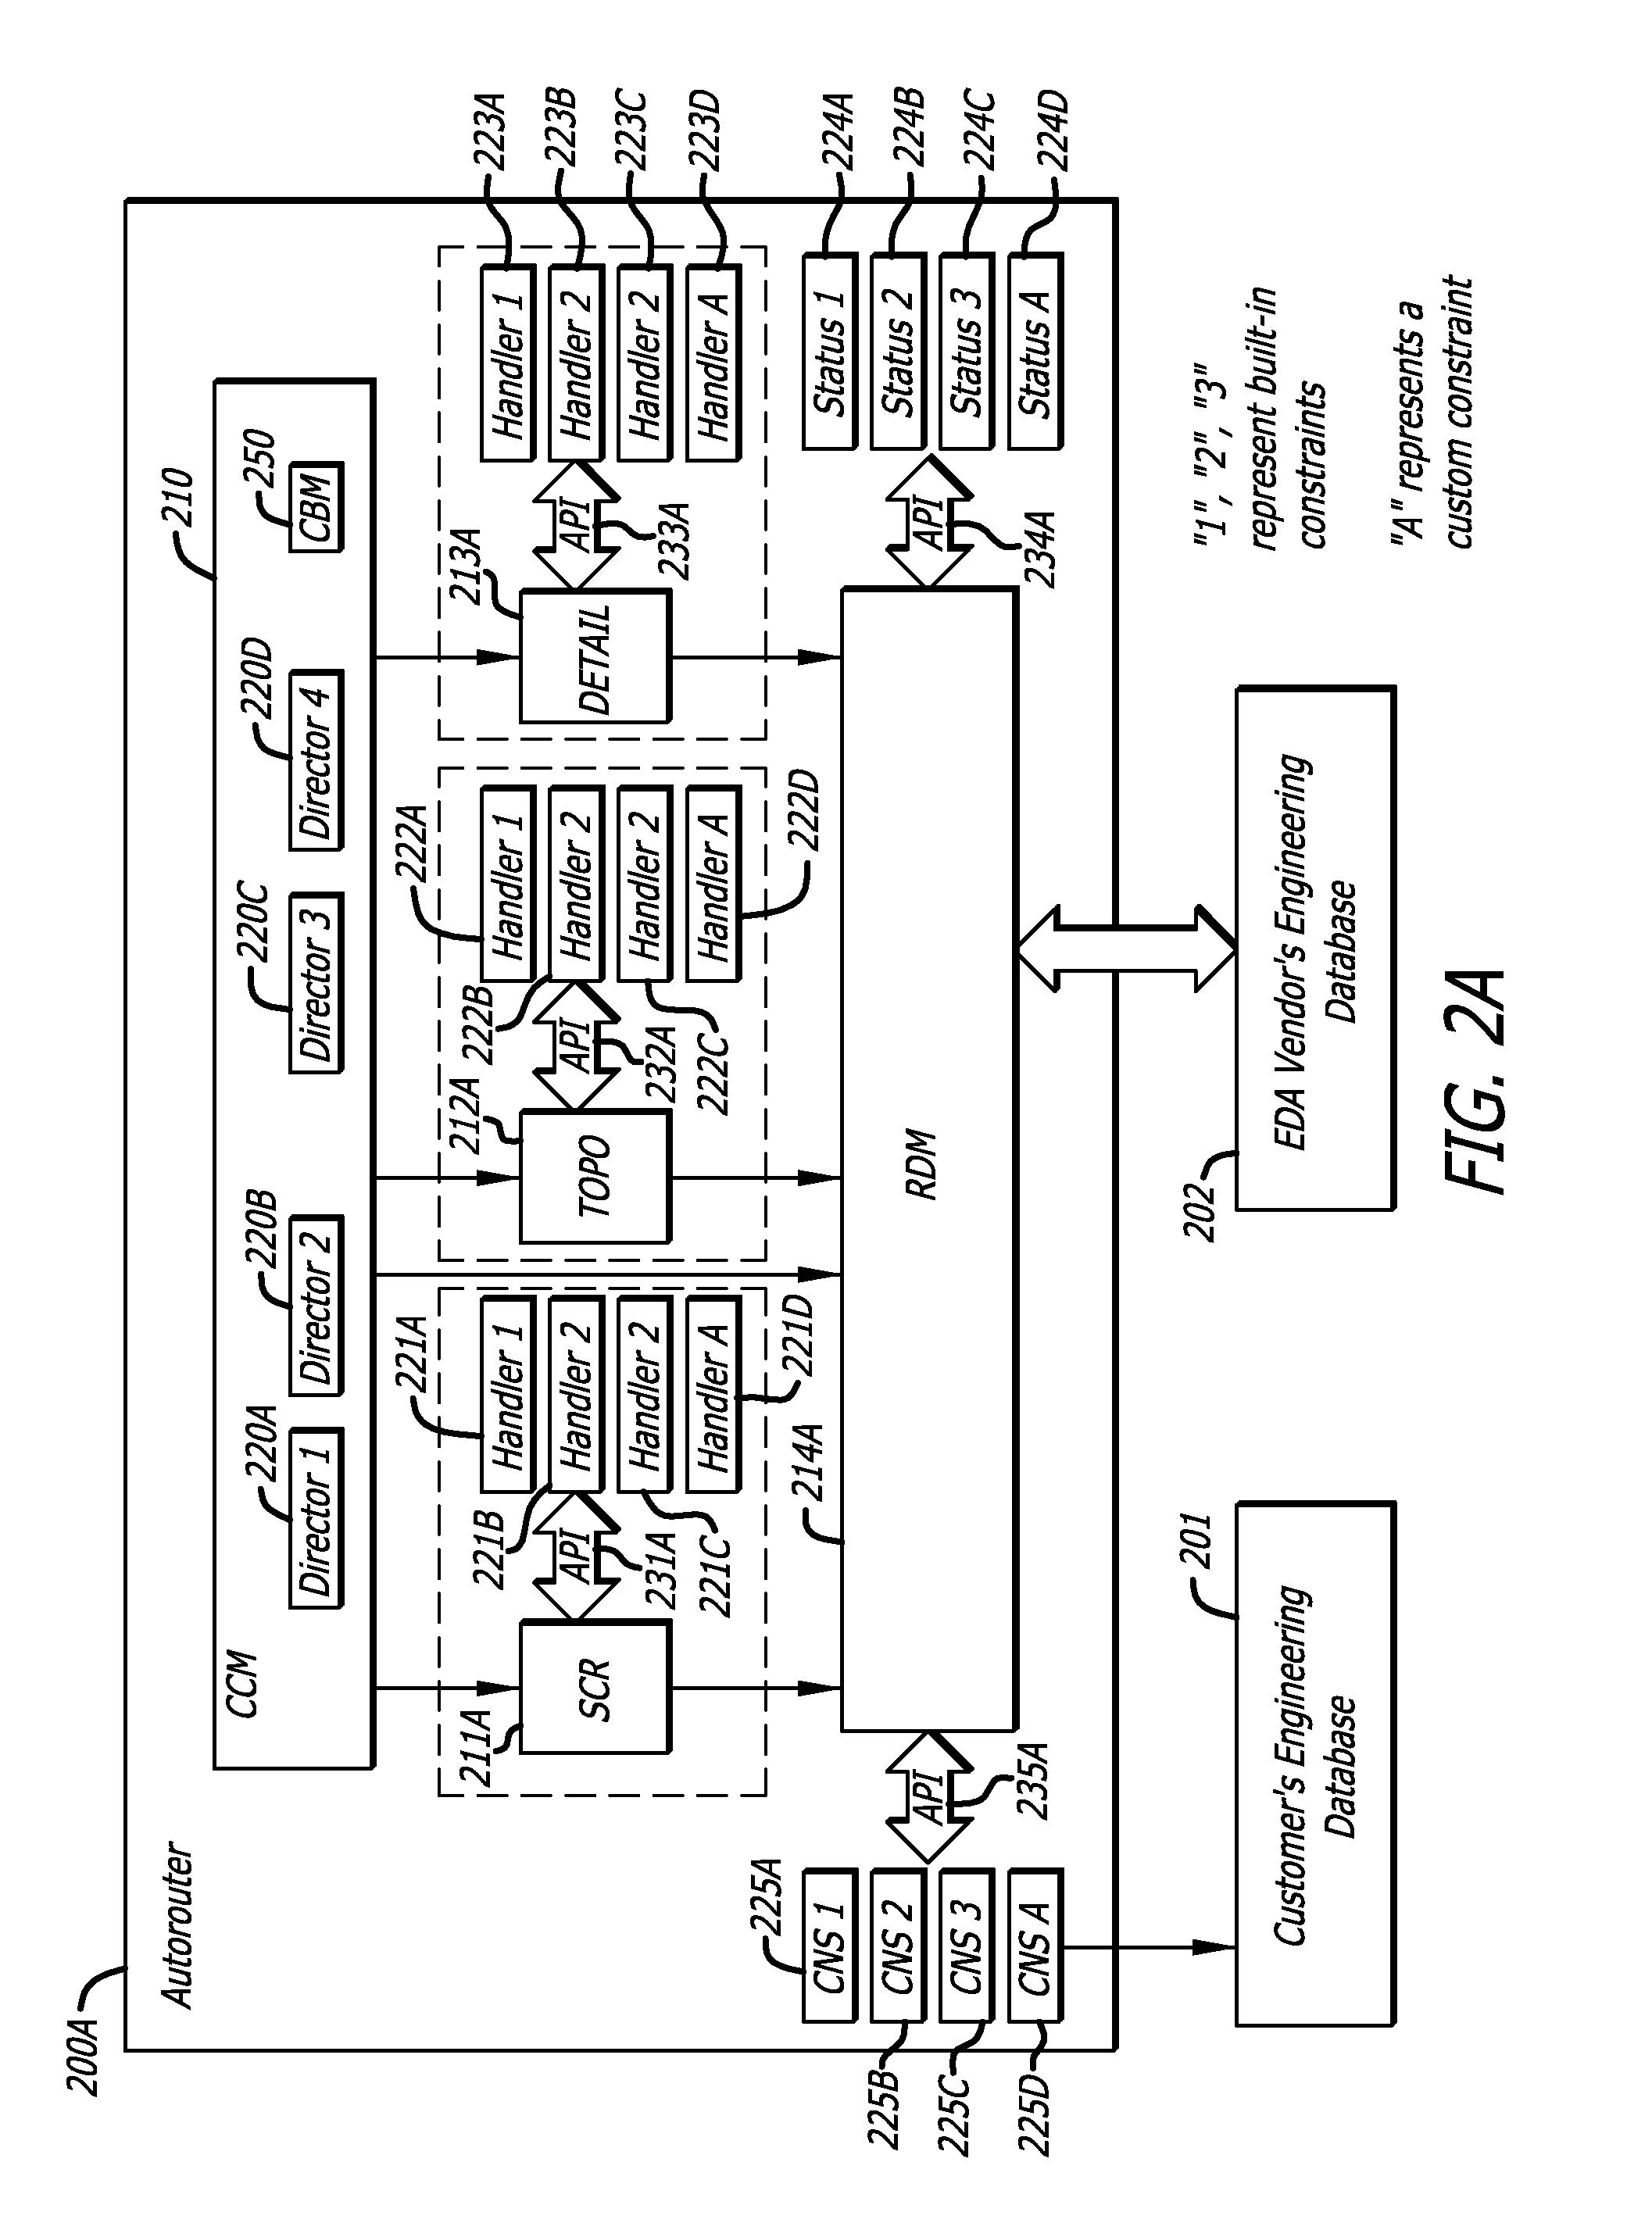 Systems for automatic circuit routing with object oriented constraints